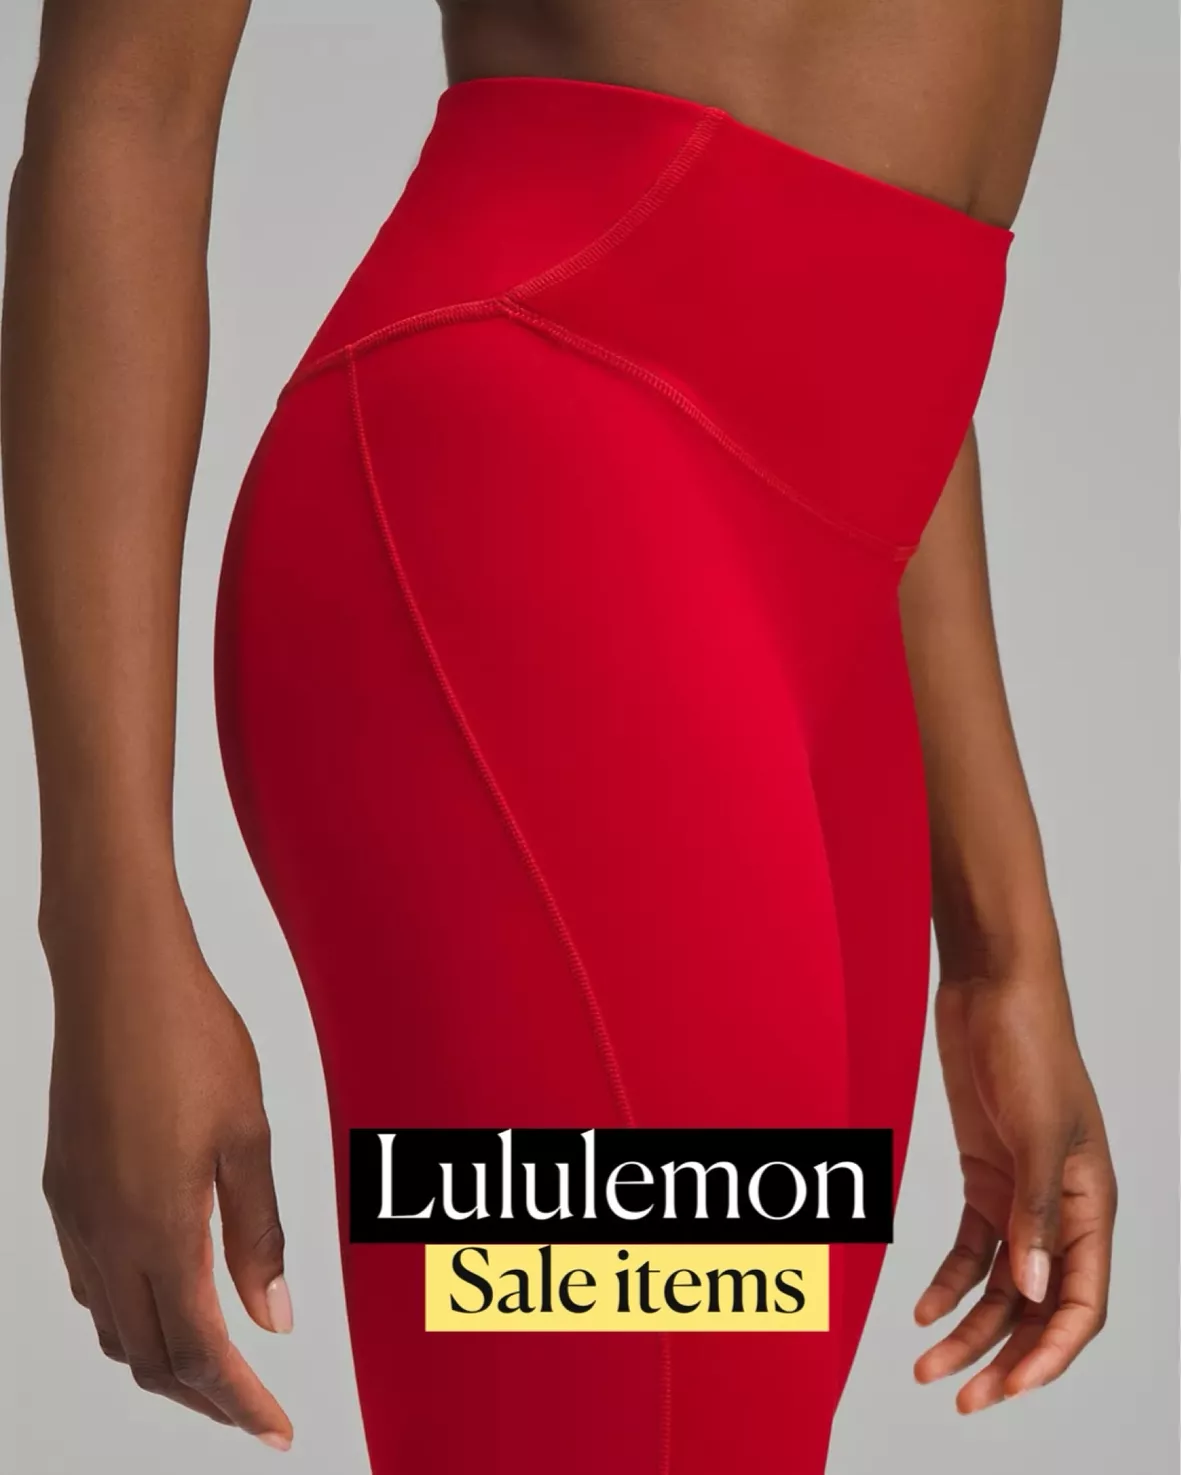 Red Leggings  Red lululemon leggings, Red leggings outfit, Red